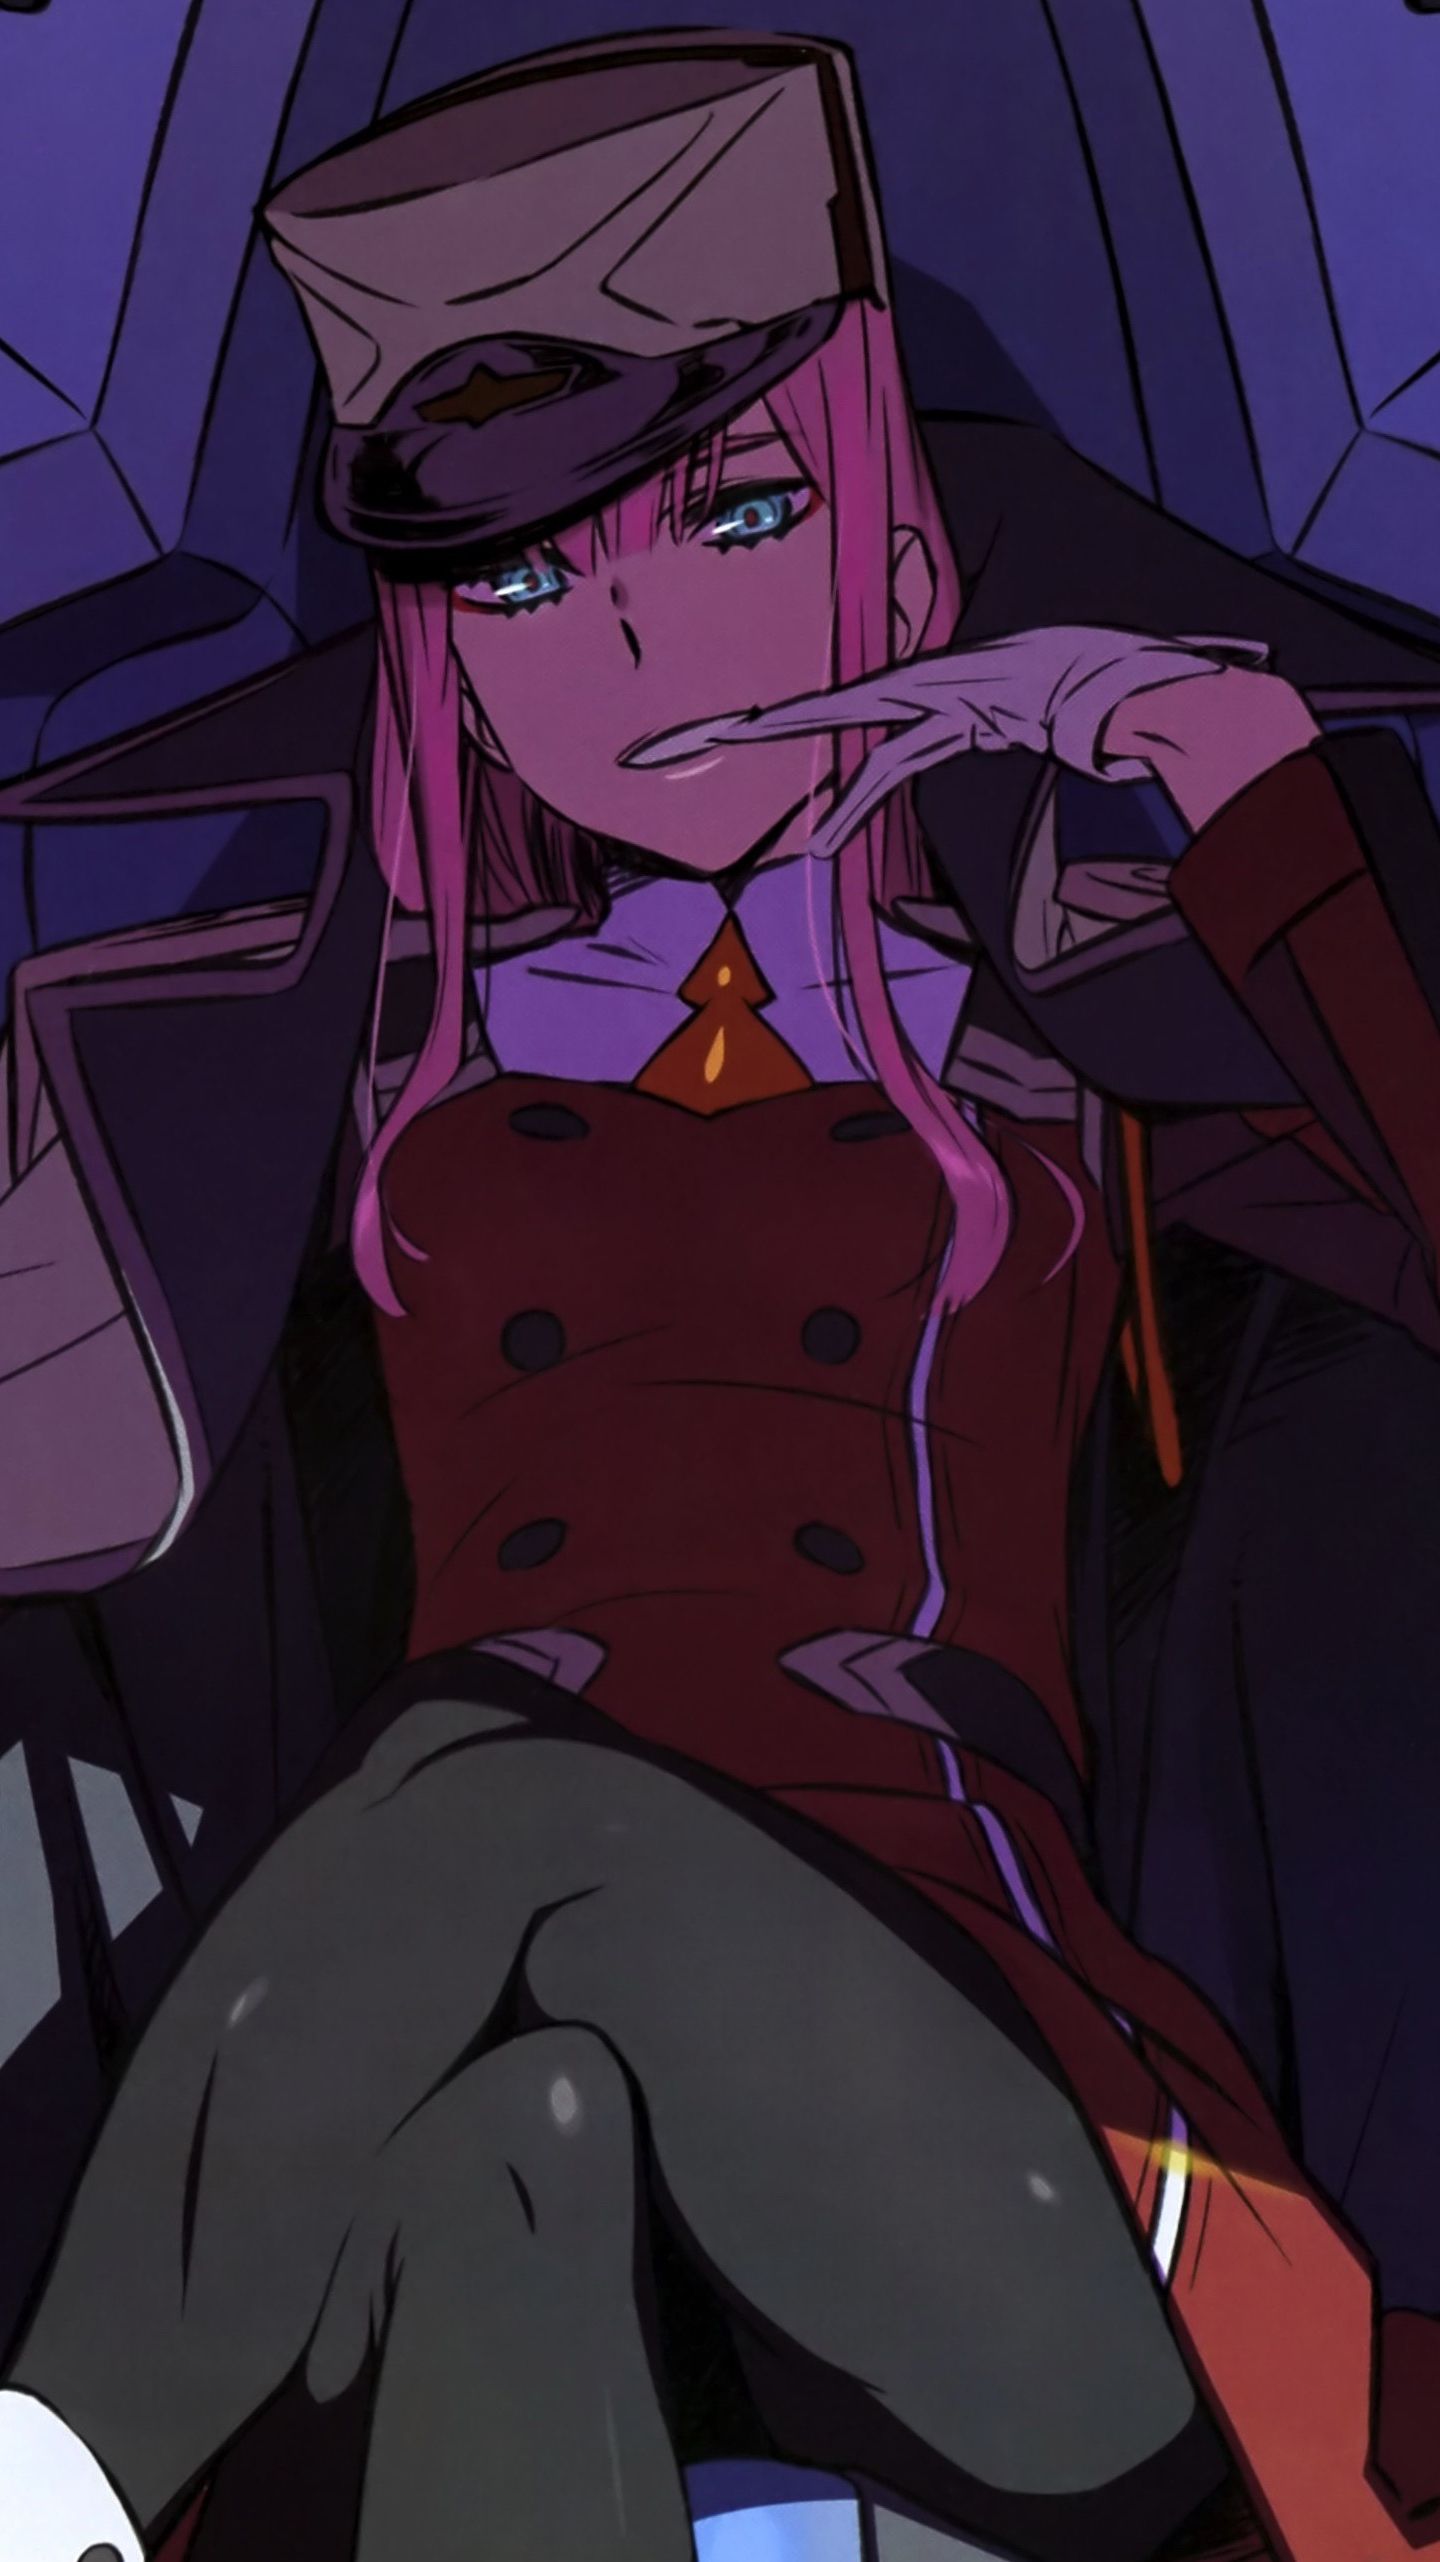 Download 1440x2960 wallpaper zero two, darling in the franxx, anime girl, calm, samsung galaxy s samsung galaxy s8 plus, 1440x2960 HD image, background, 2258